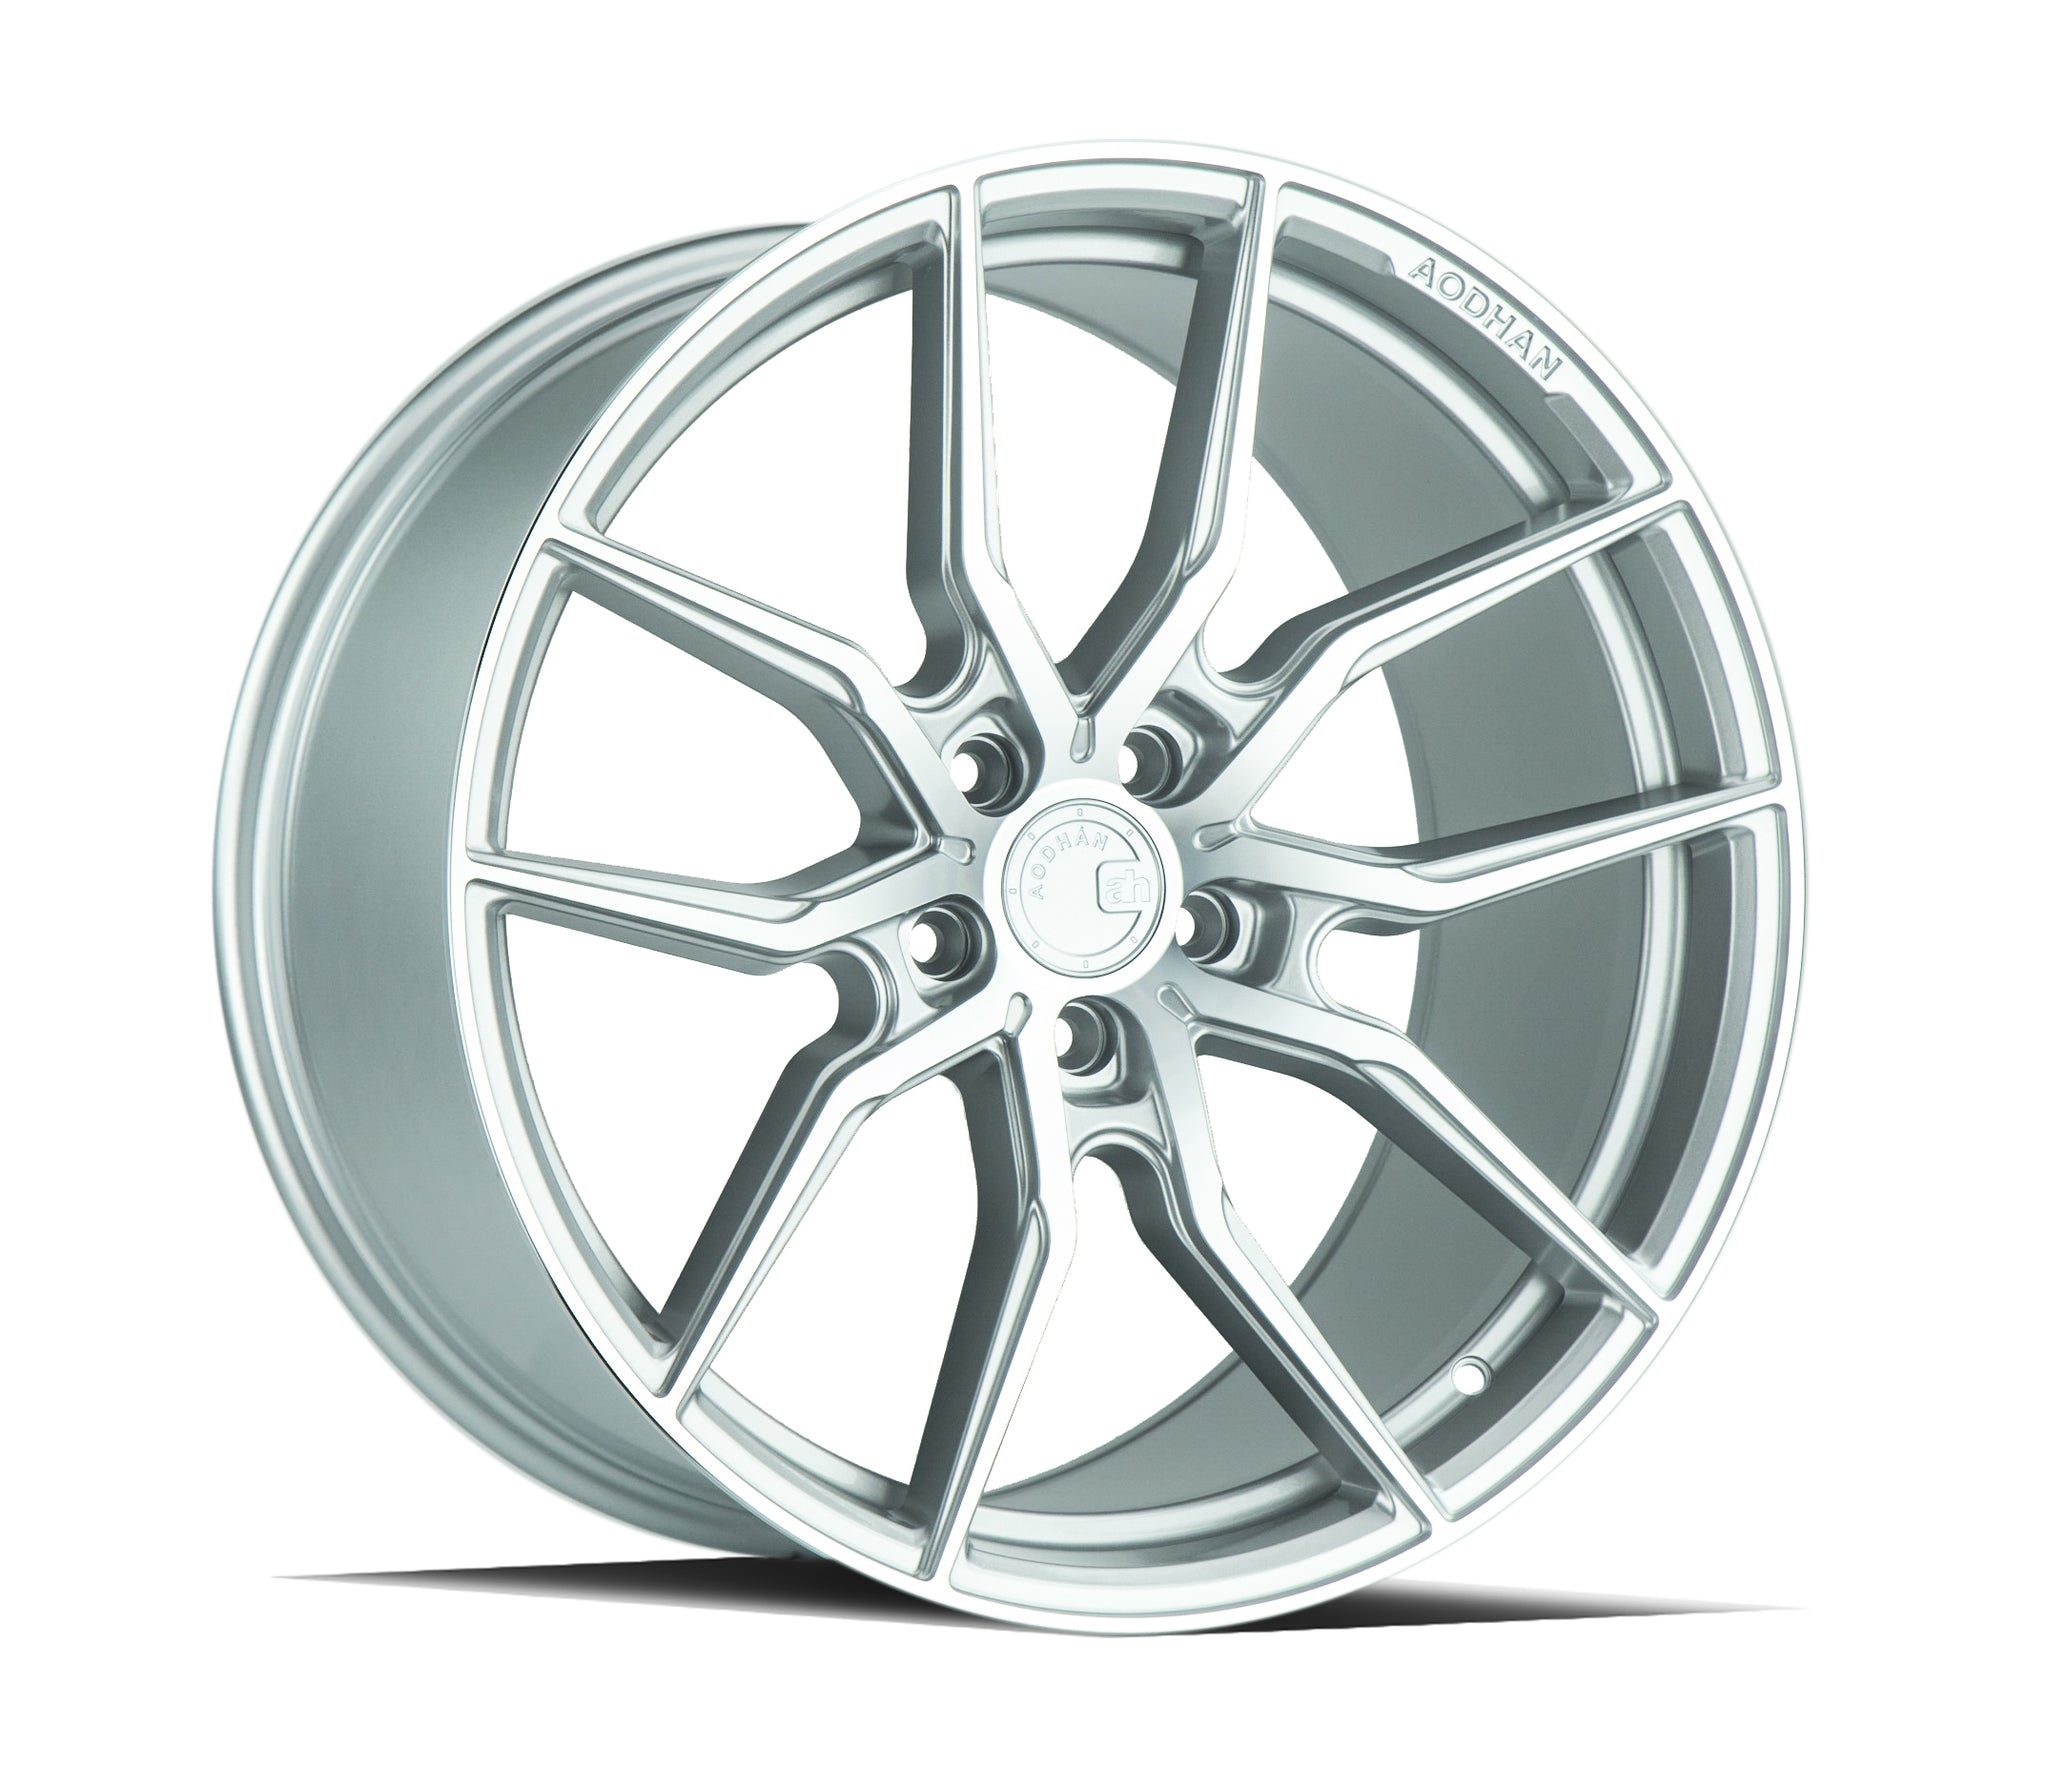 AODHAN AFF1 SILVER WITH MACHINED FACE WHEELS | 20X10.5 | 5X120 | OFFSET: 35MM | CB: 72.6MM